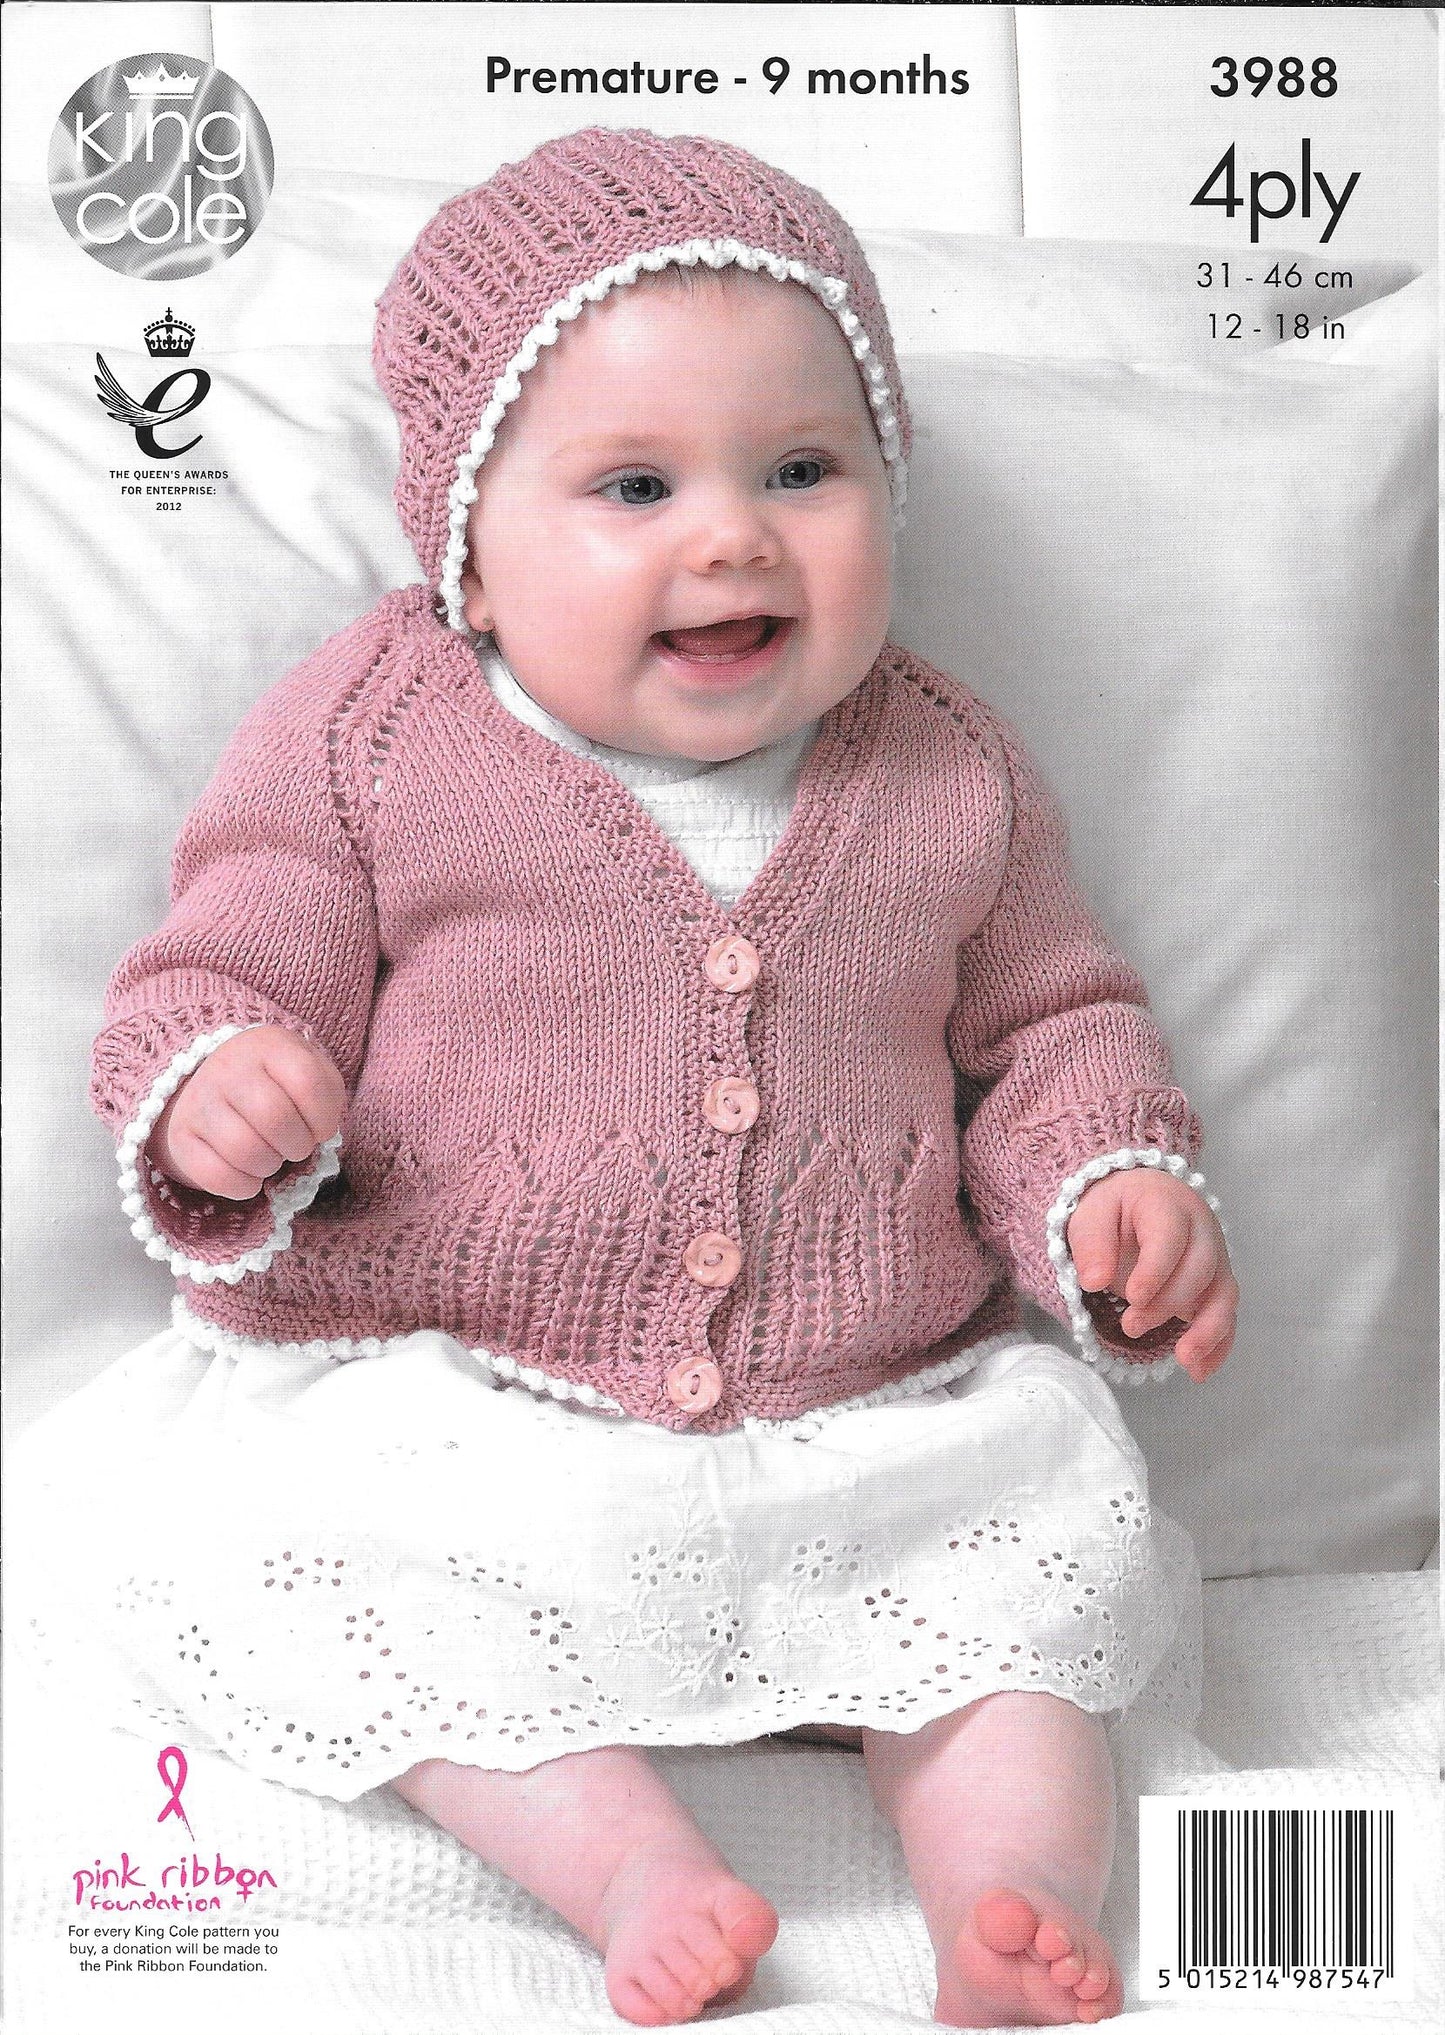 3988 King Cole bamboo cotton 4 ply premature, baby matinee coat and cardigan plus hats knitting pattern